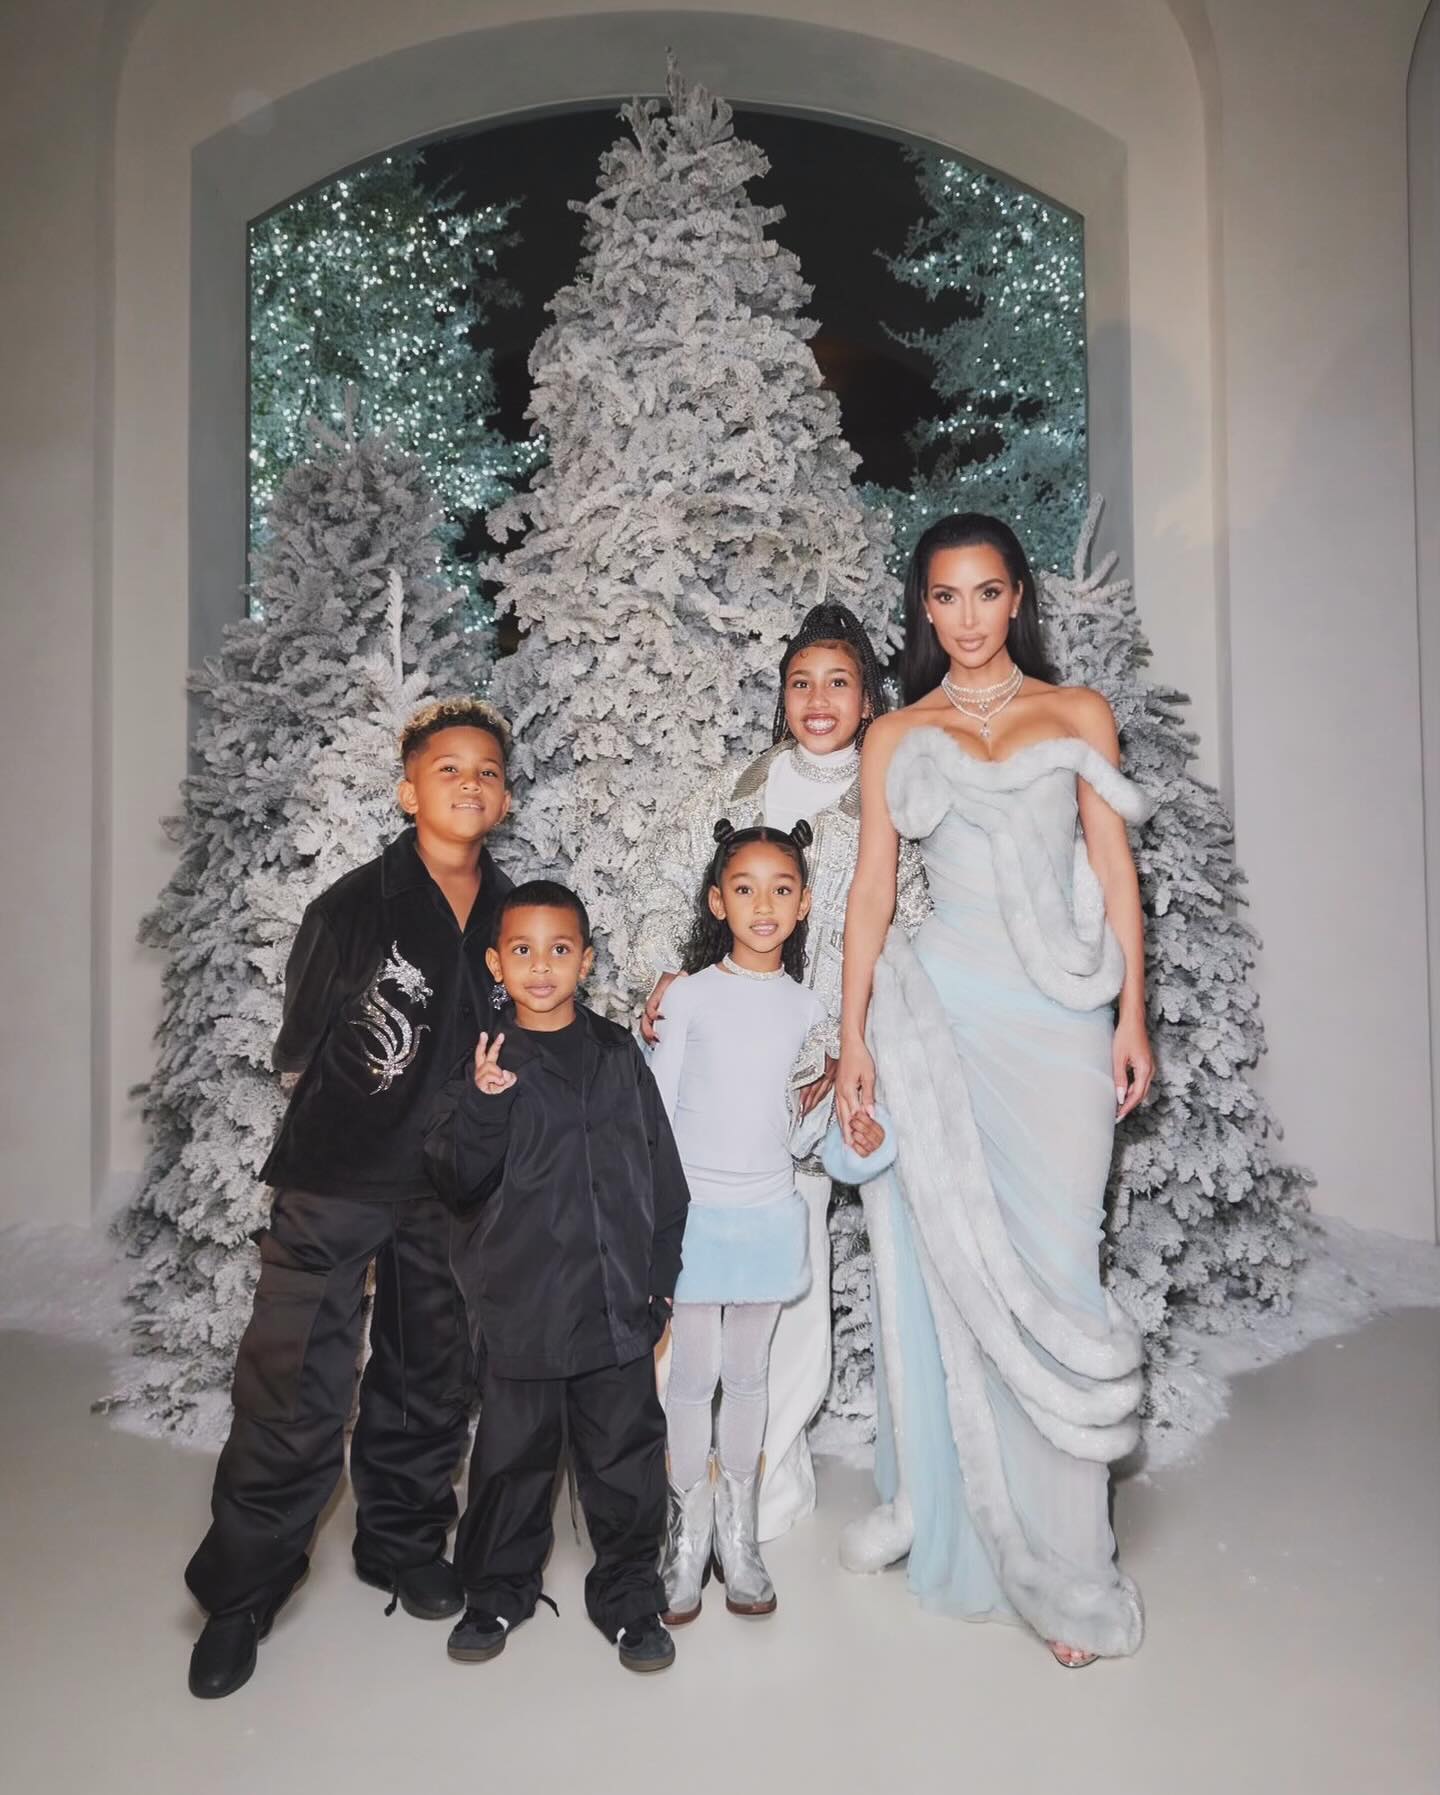 Kim had her four children, North, Saint, Psalm, and Chicago West all dressed up for the famous family's Christmas Eve bash